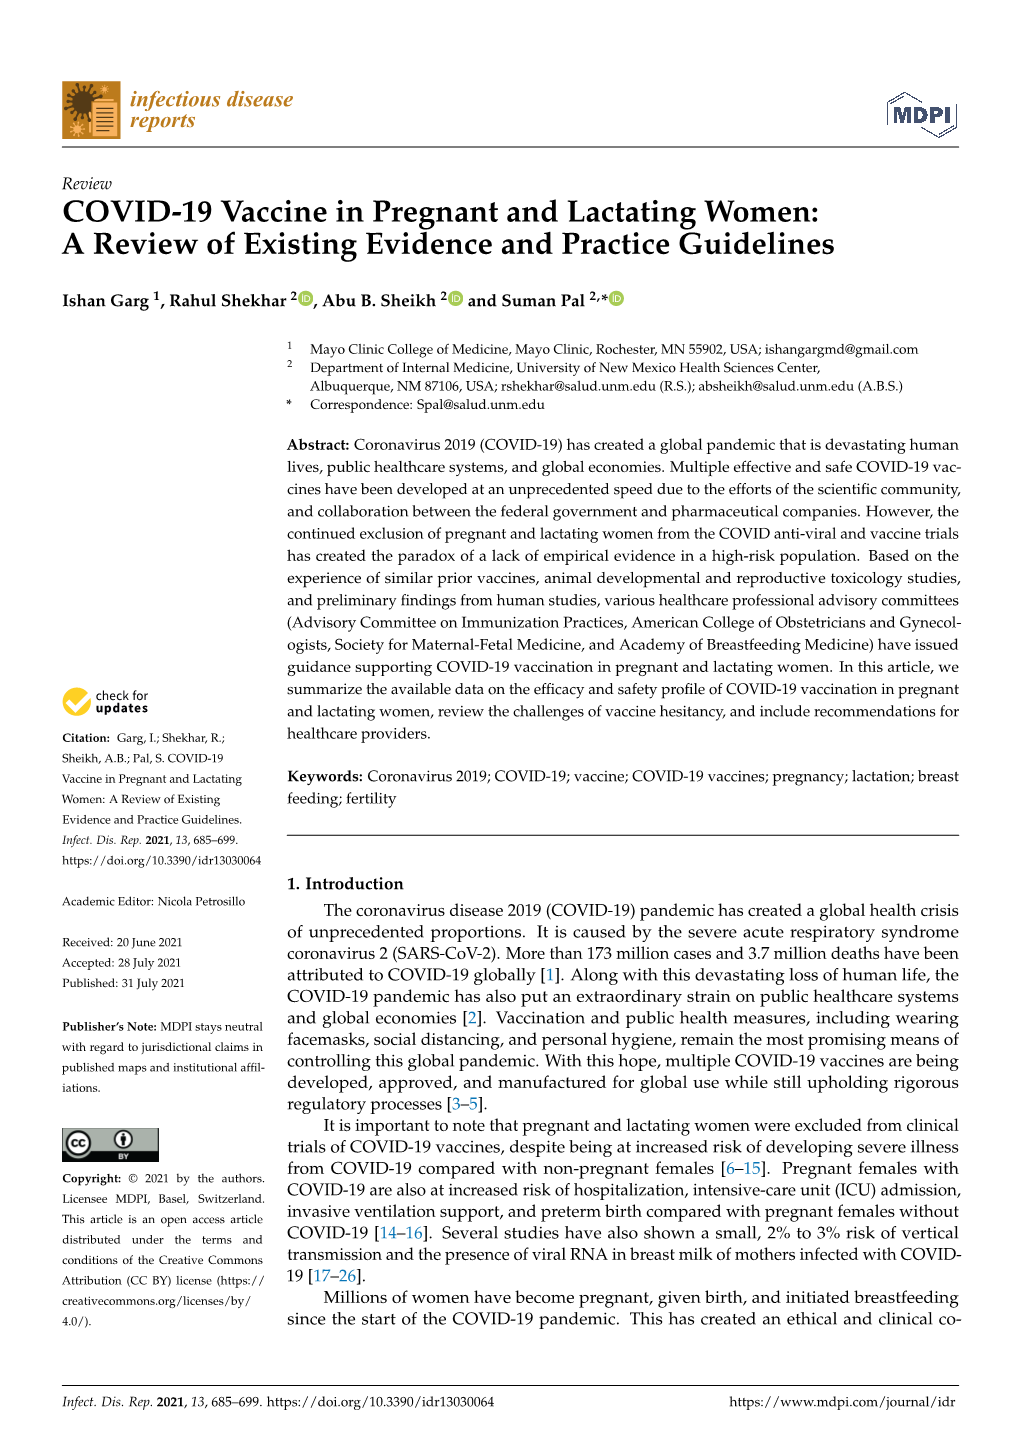 COVID-19 Vaccine in Pregnant and Lactating Women: a Review of Existing Evidence and Practice Guidelines